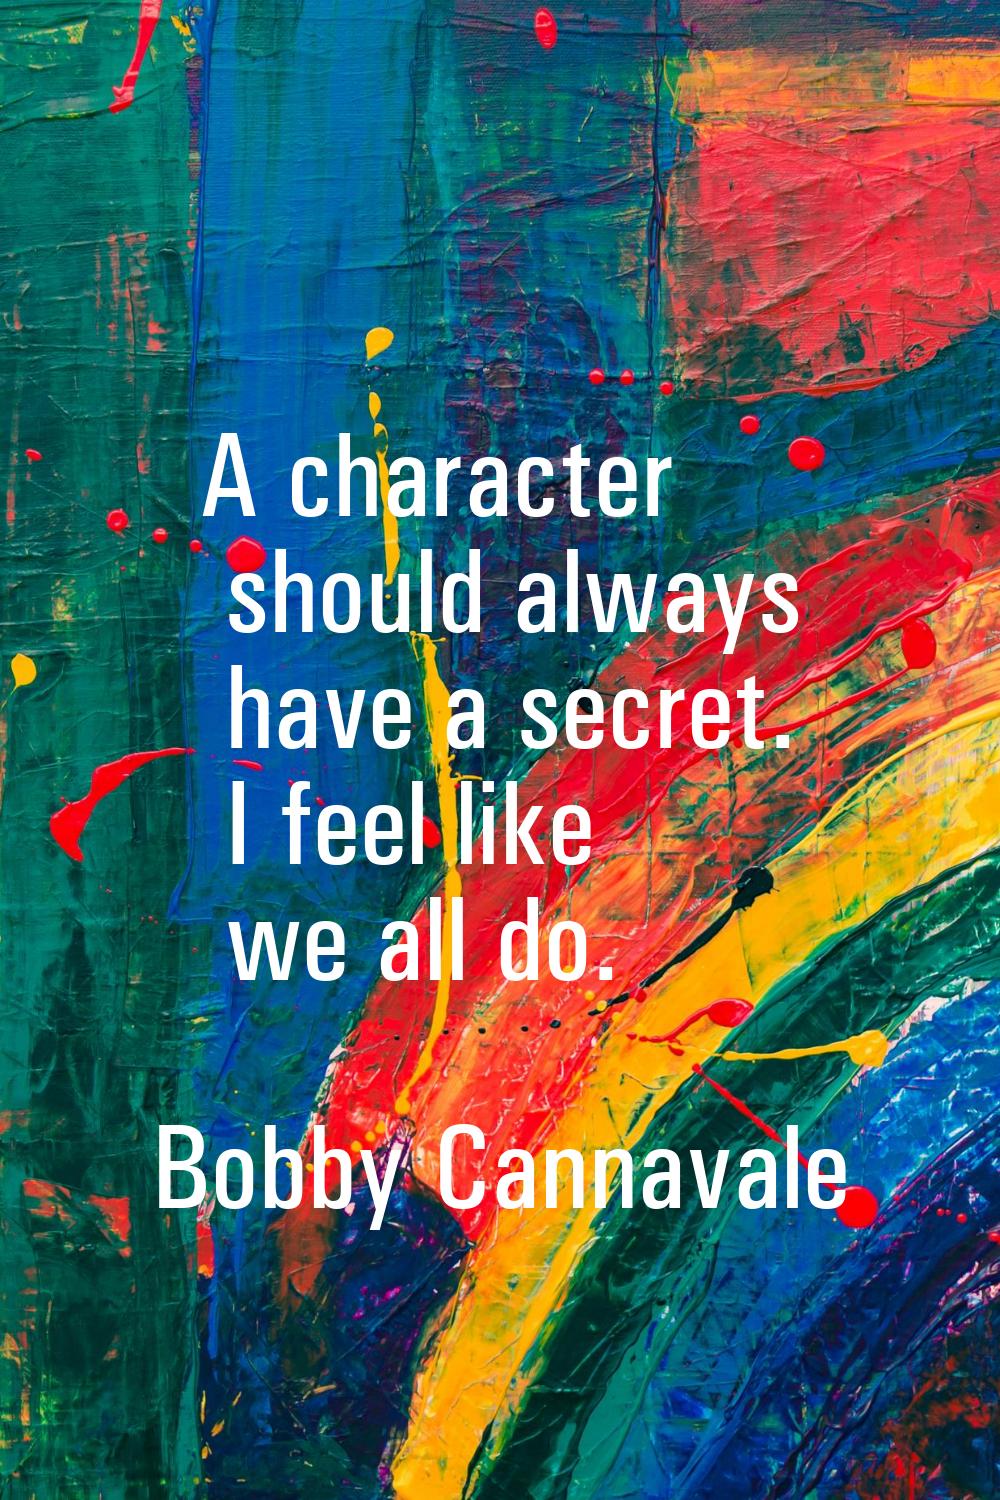 A character should always have a secret. I feel like we all do.